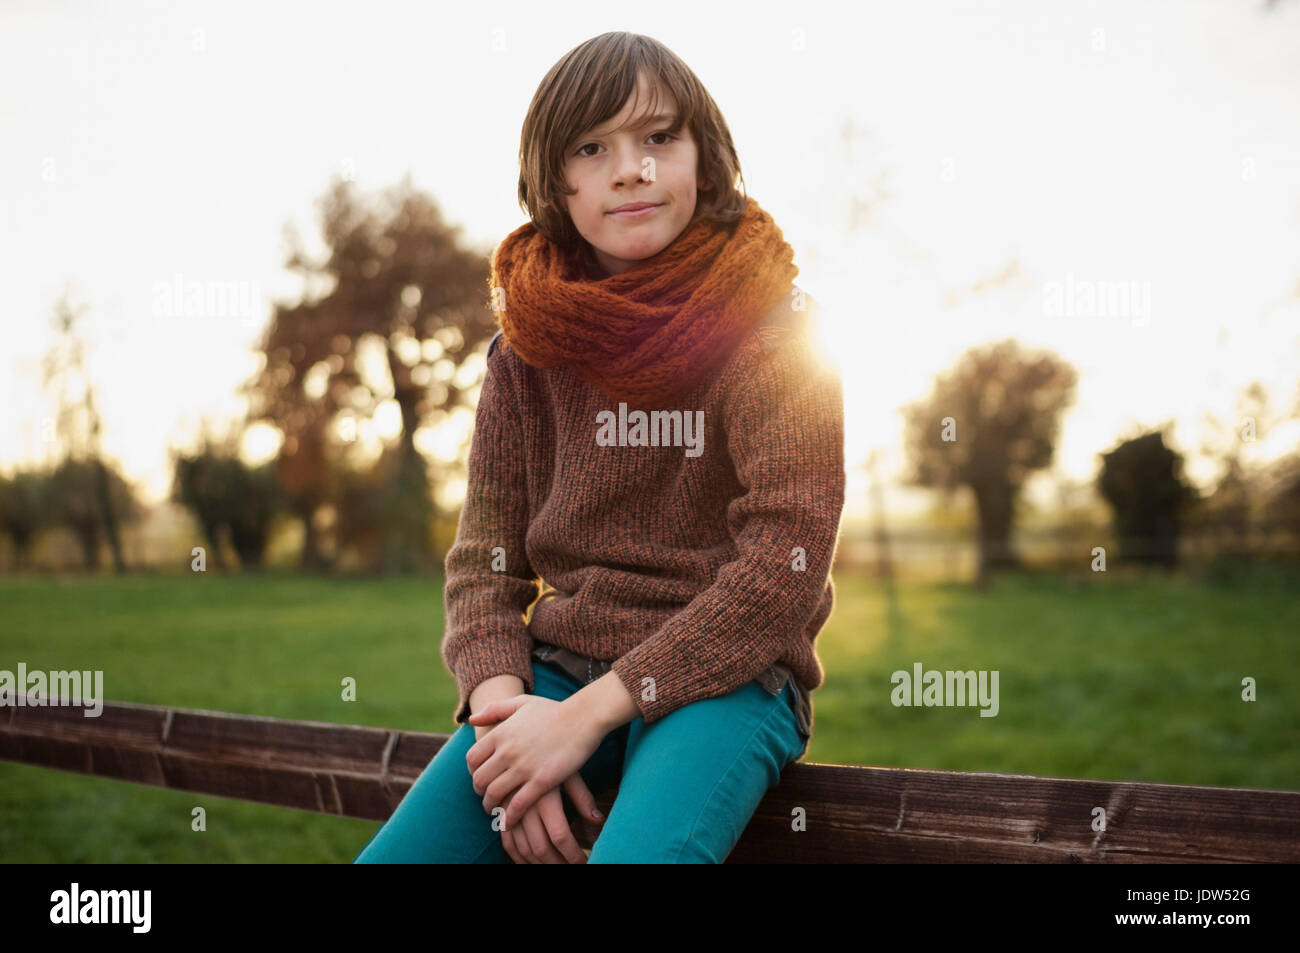 Boy in scarf sitting on fence in countryside, portrait Stock Photo